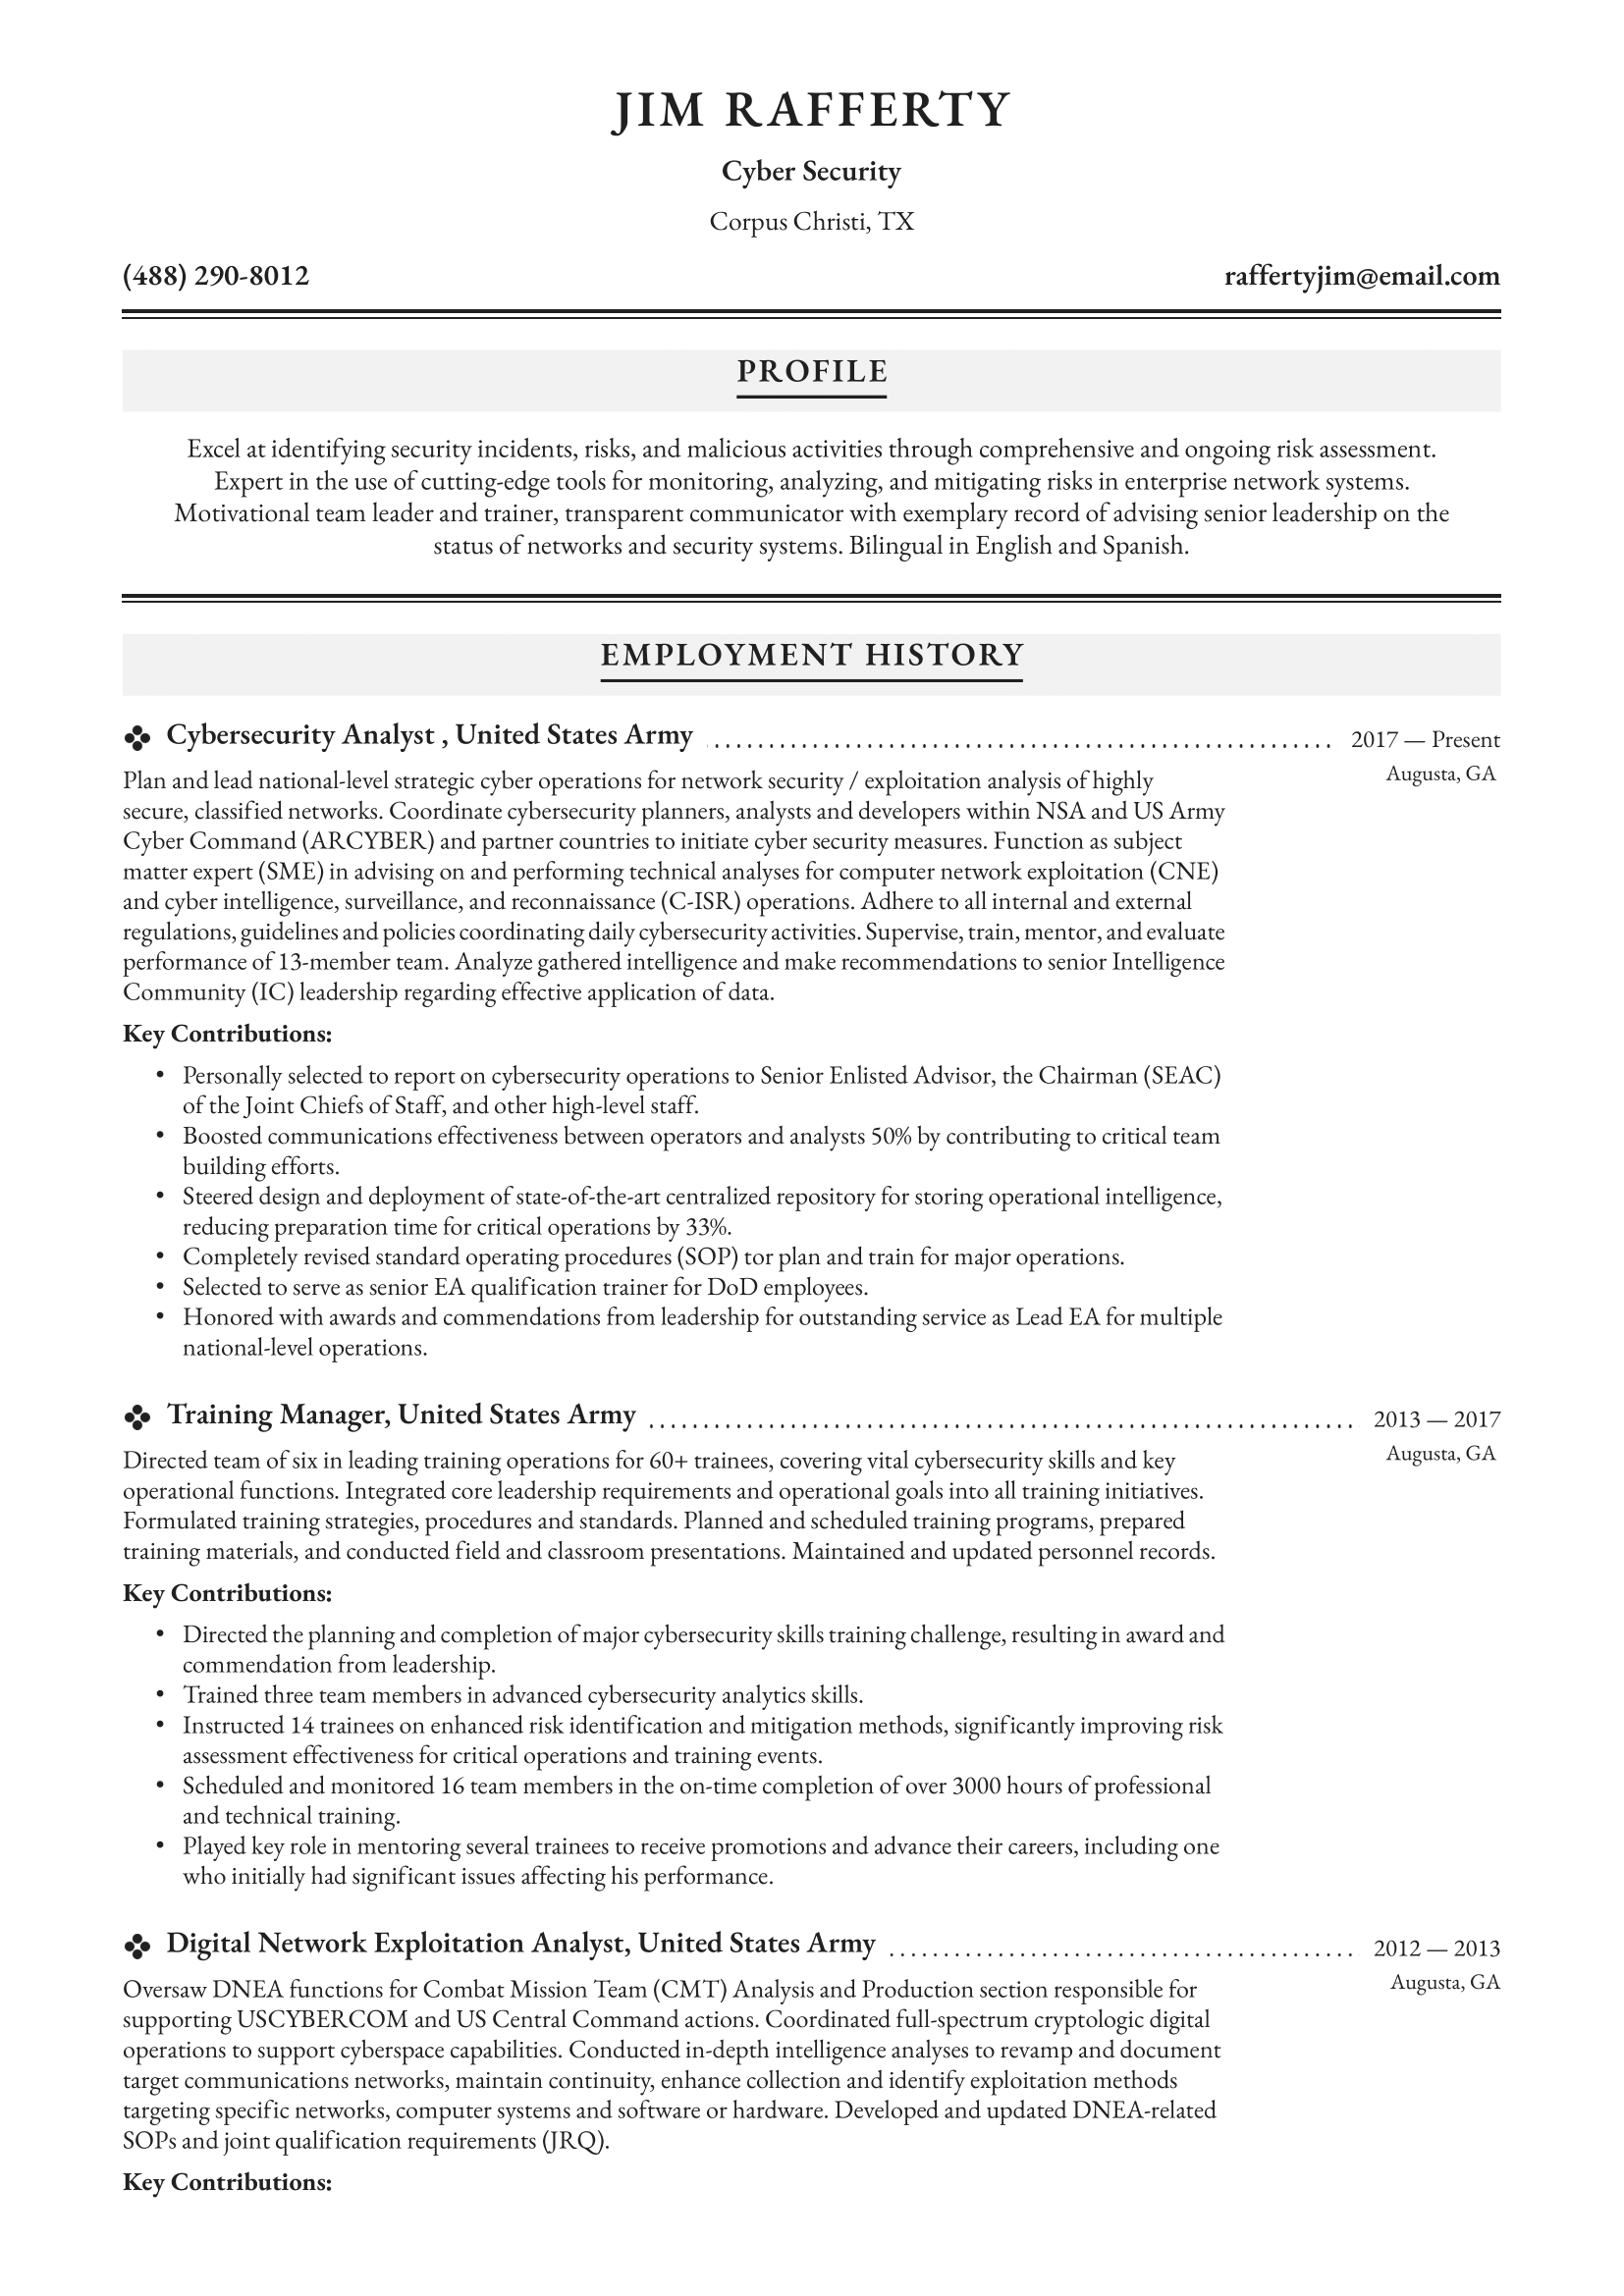 Cybersecurity Analyst Resume Example & Writing Guide